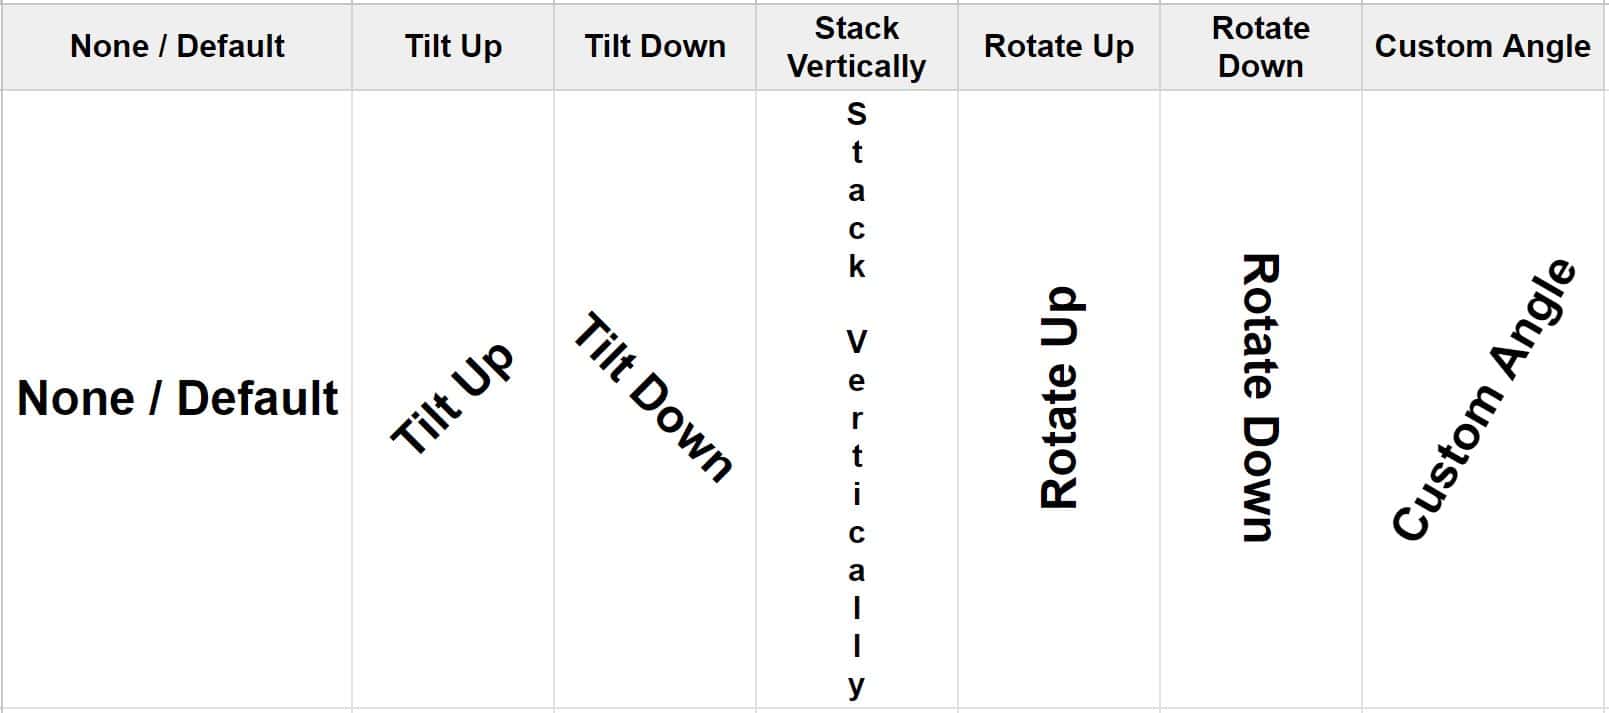 An example of the different ways to rotate text in a Google spreadsheet- None, Tilt up, tilt down, stack vertically, rotate up, rotate down, custom angle